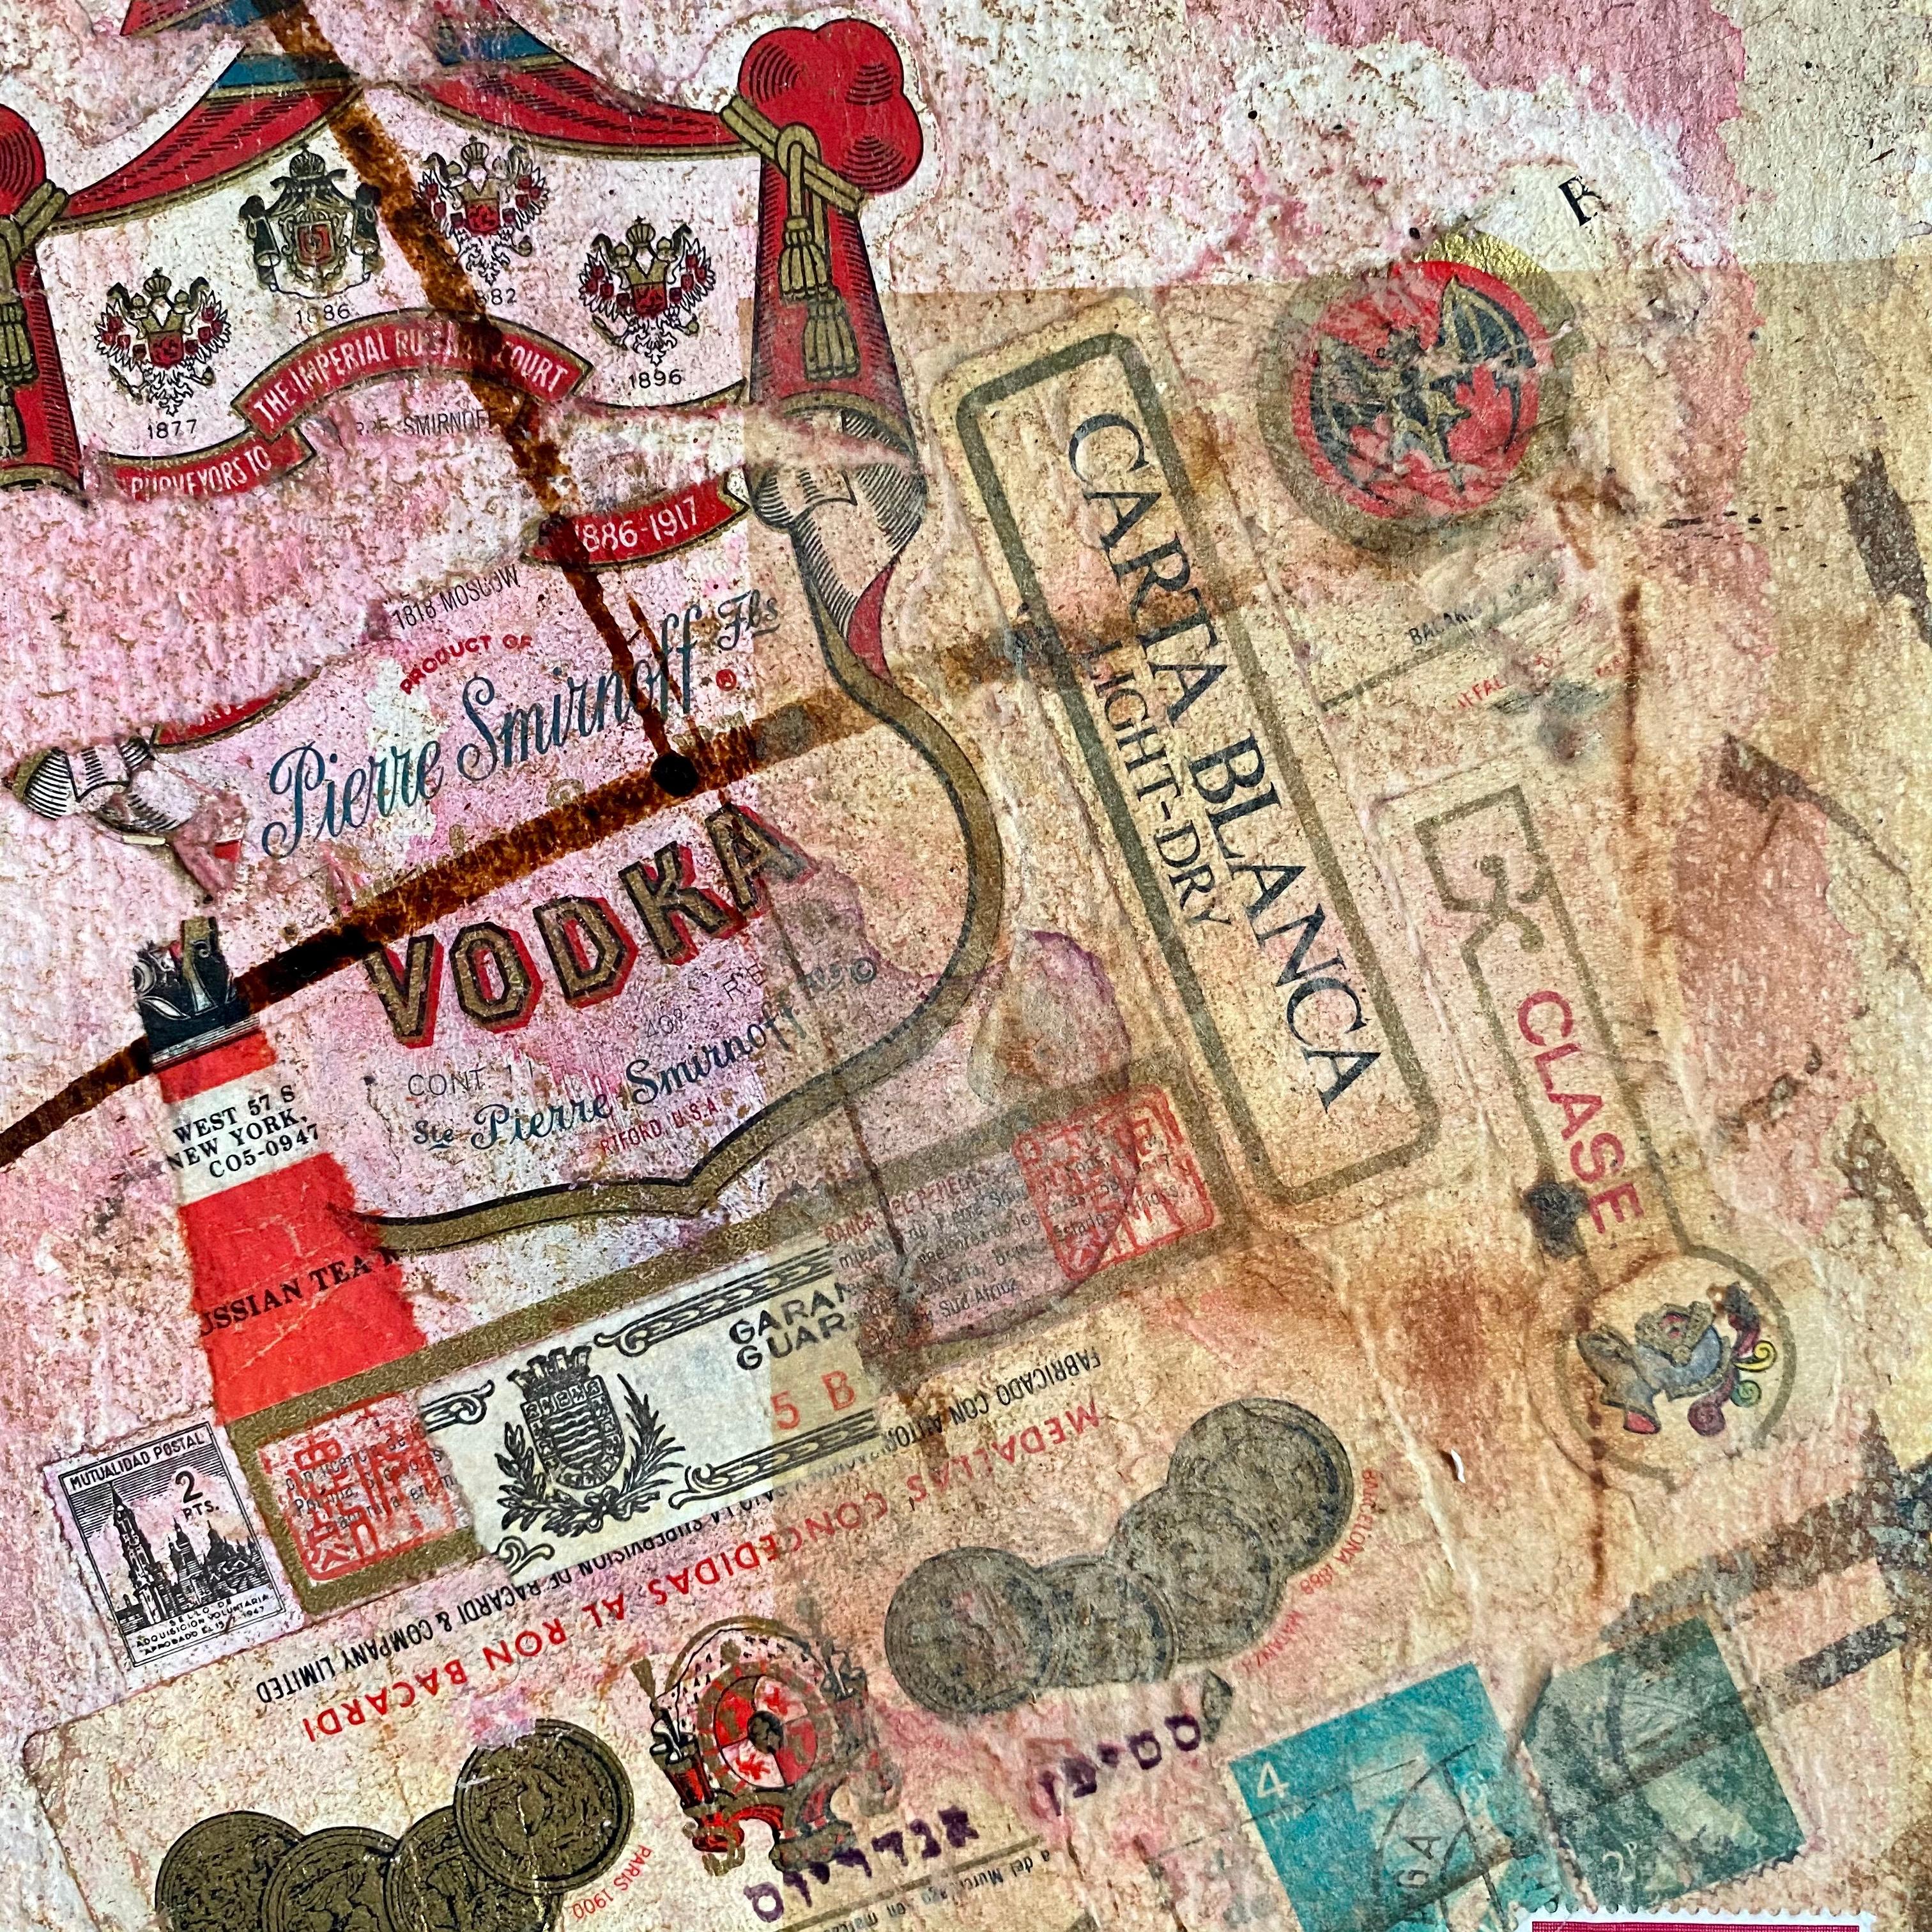 Canadian Art MIxed Media Collage Assemblage Painting Hebrew Stamp Smirnoff Vodka 1